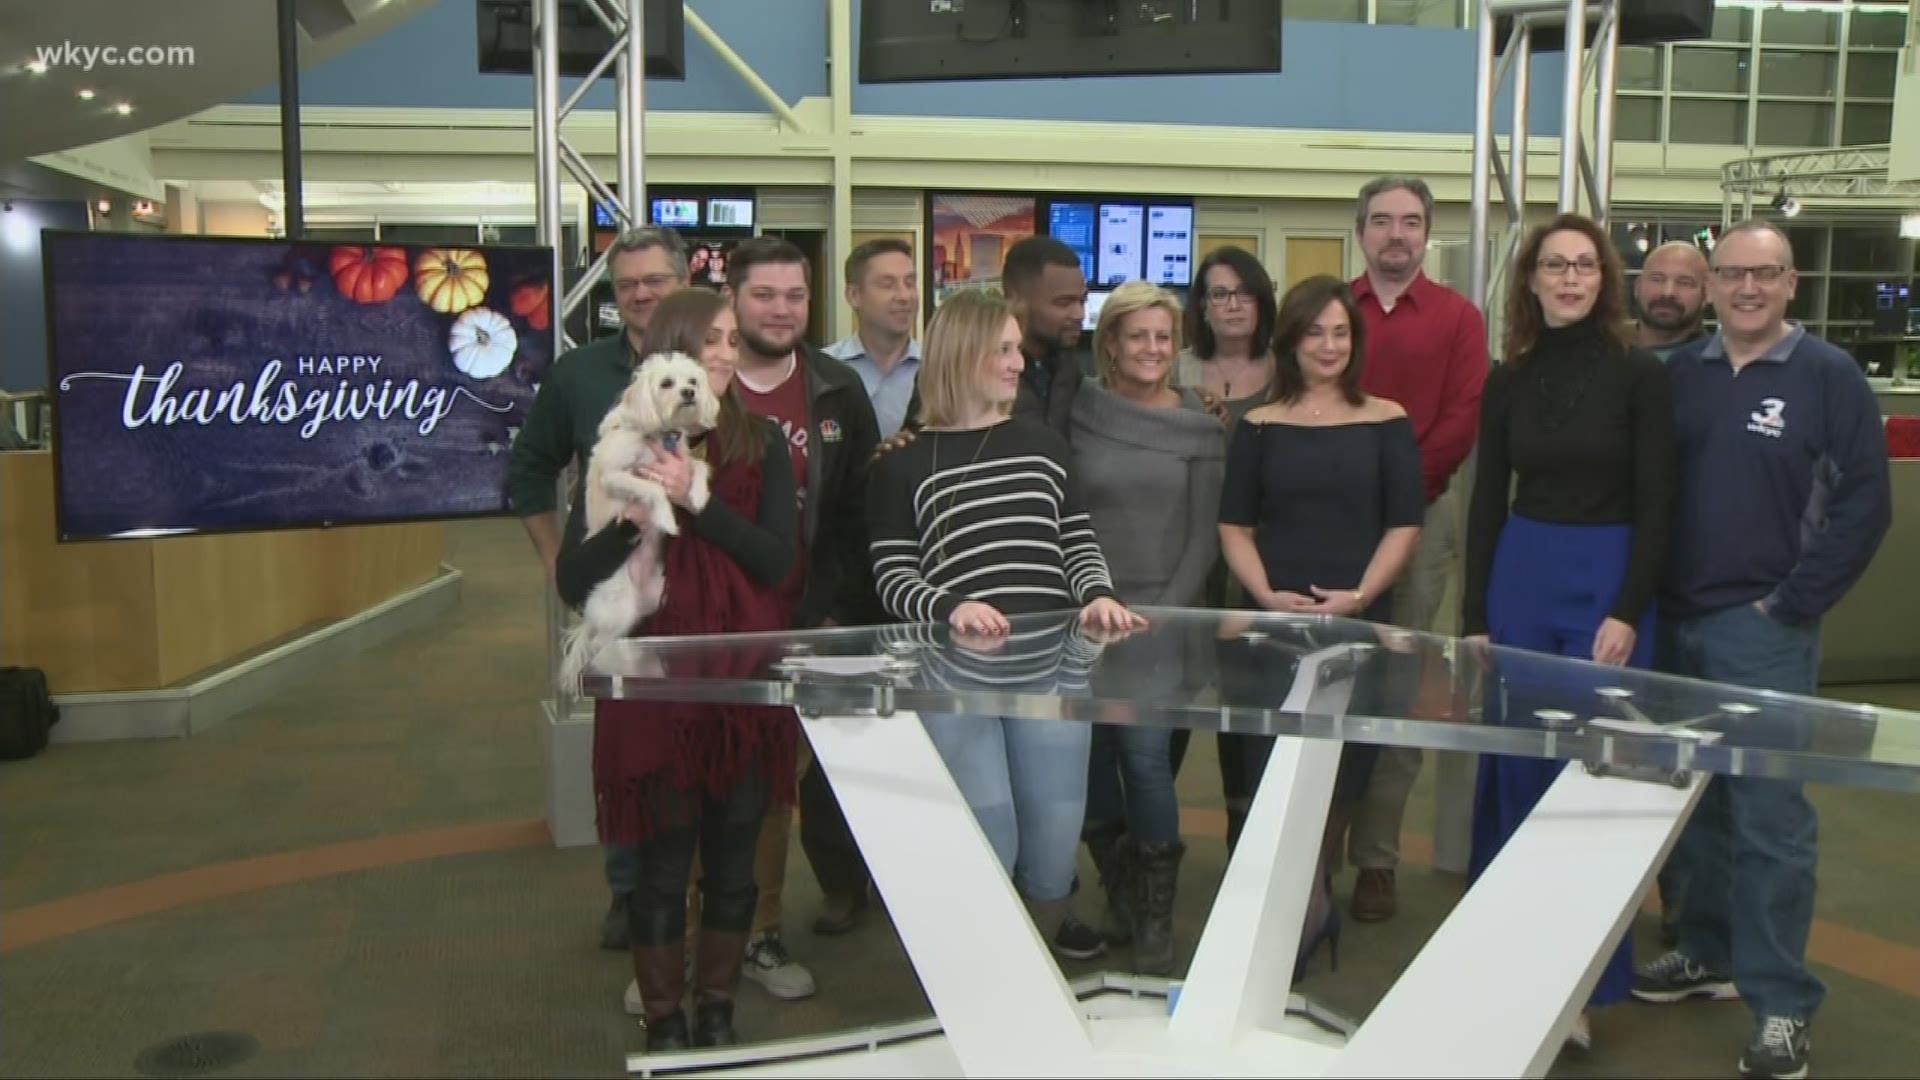 Happy Thanksgiving from WKYC!